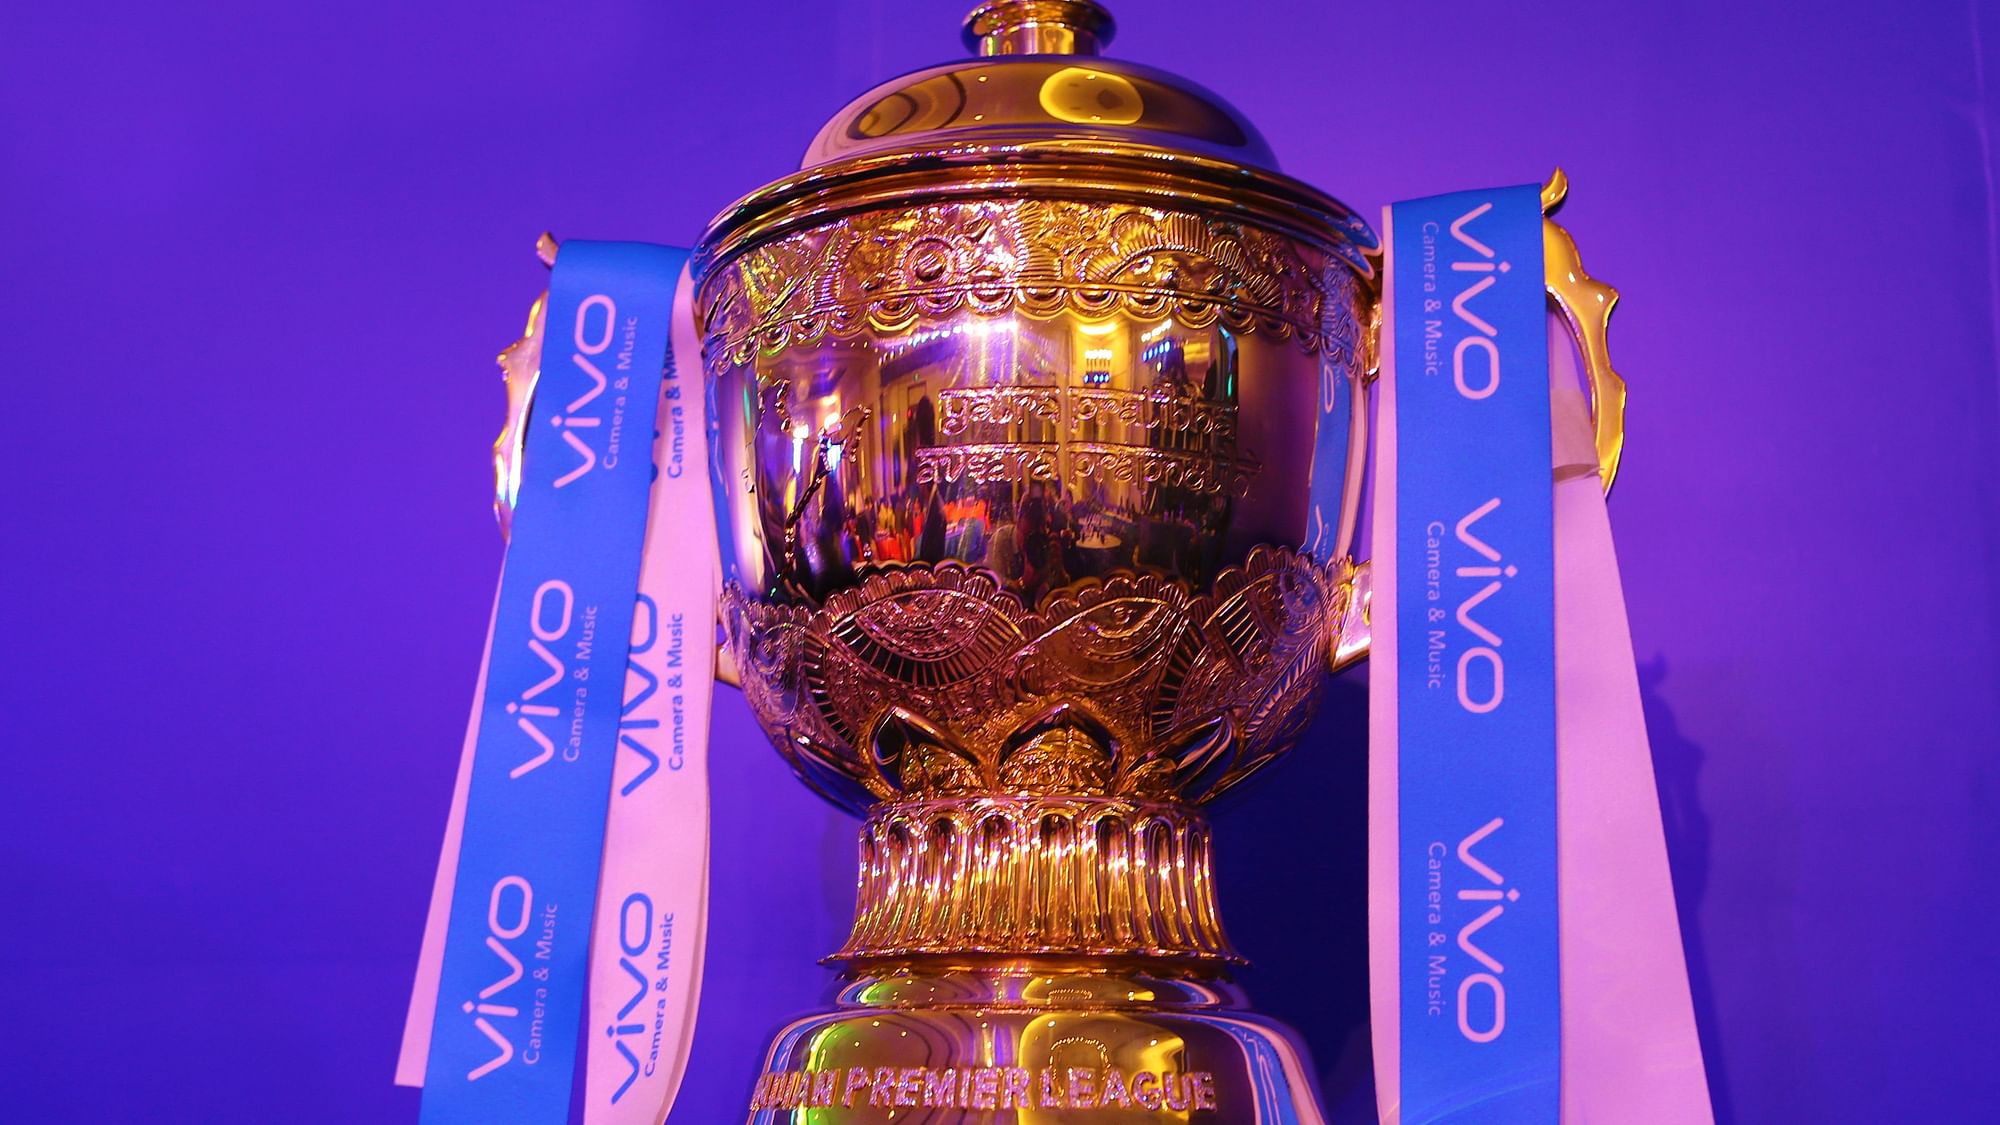 IPL 2021 was suspended due to new COVID cases within teams.